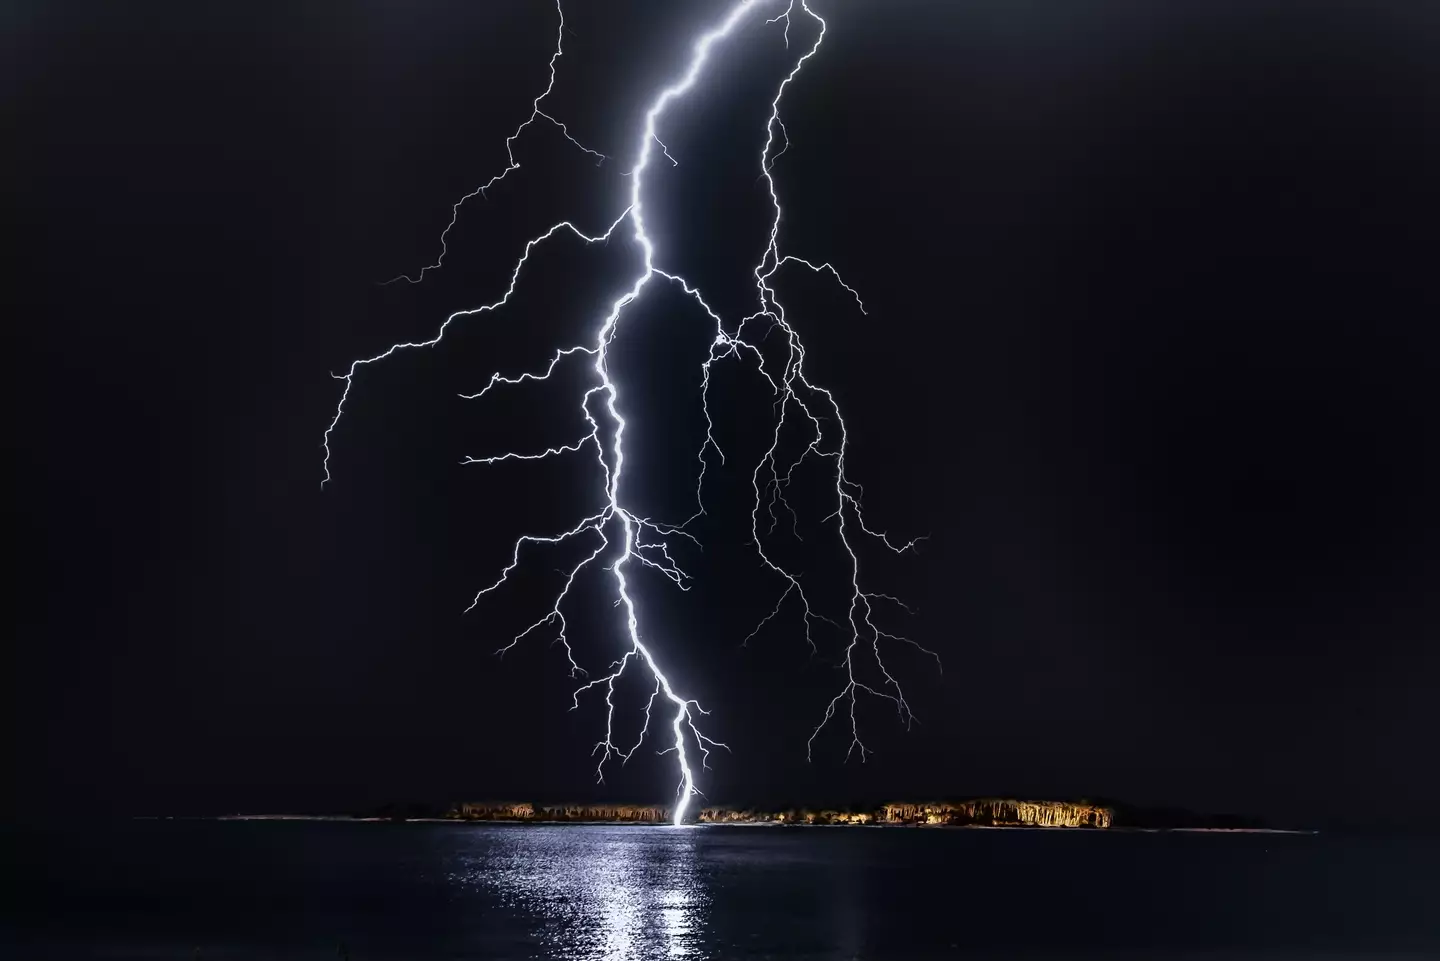 Every 1 in 12,000 people is likely to get struck by lightning.